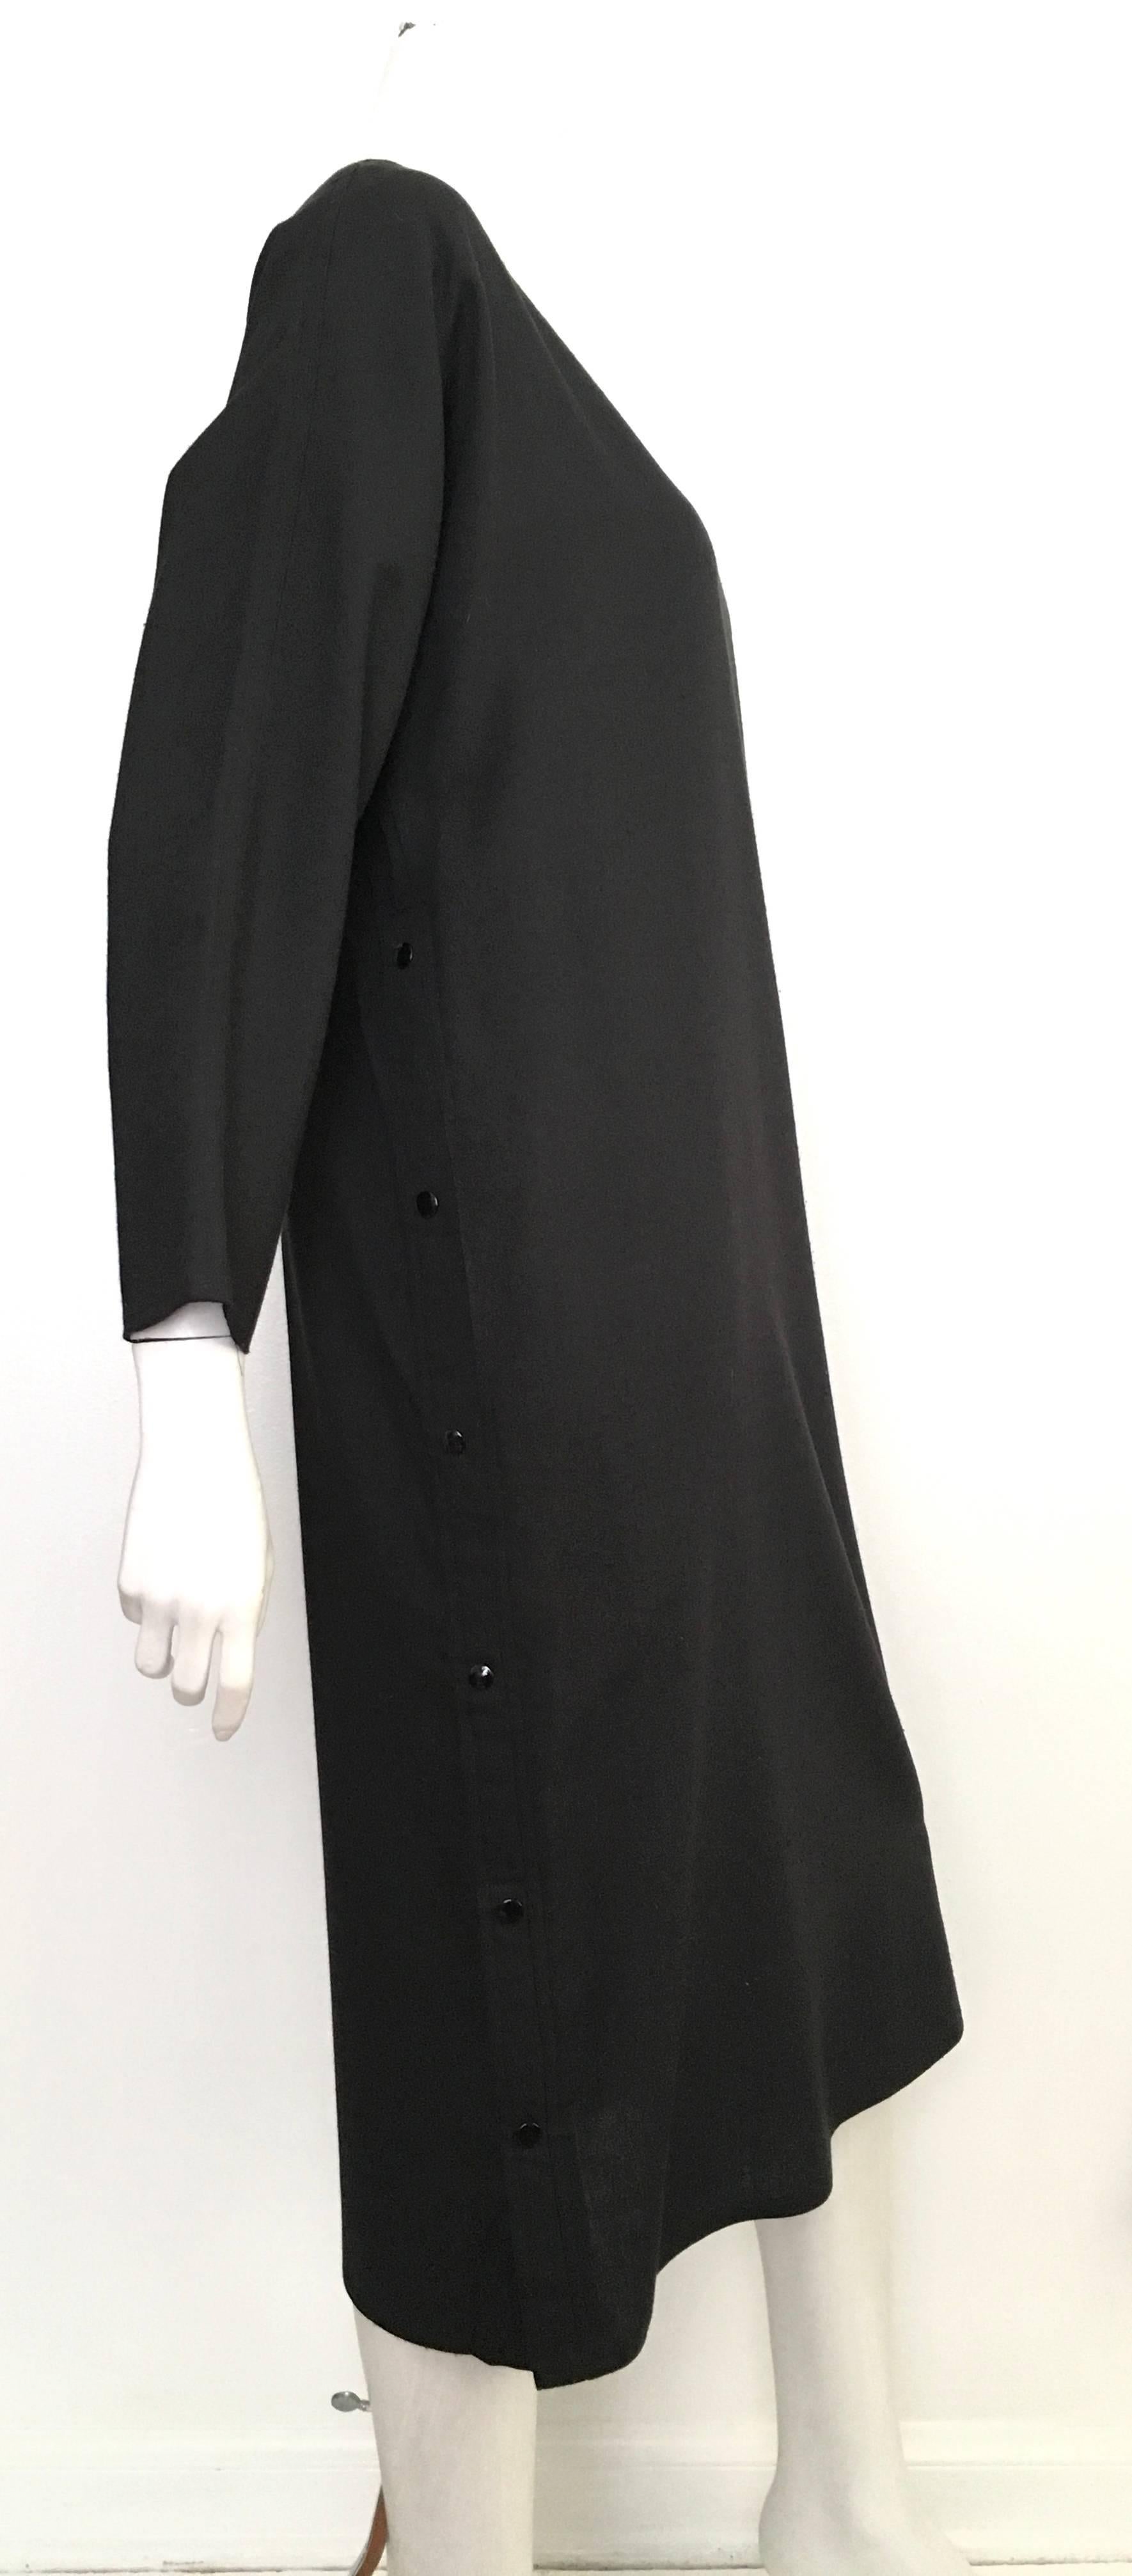 Geoffrey Beene for Gallant 1980s black linen dress with pockets and side snap buttons is a size 12.  This vintage gem will look amazing on any woman that is at least 5'8